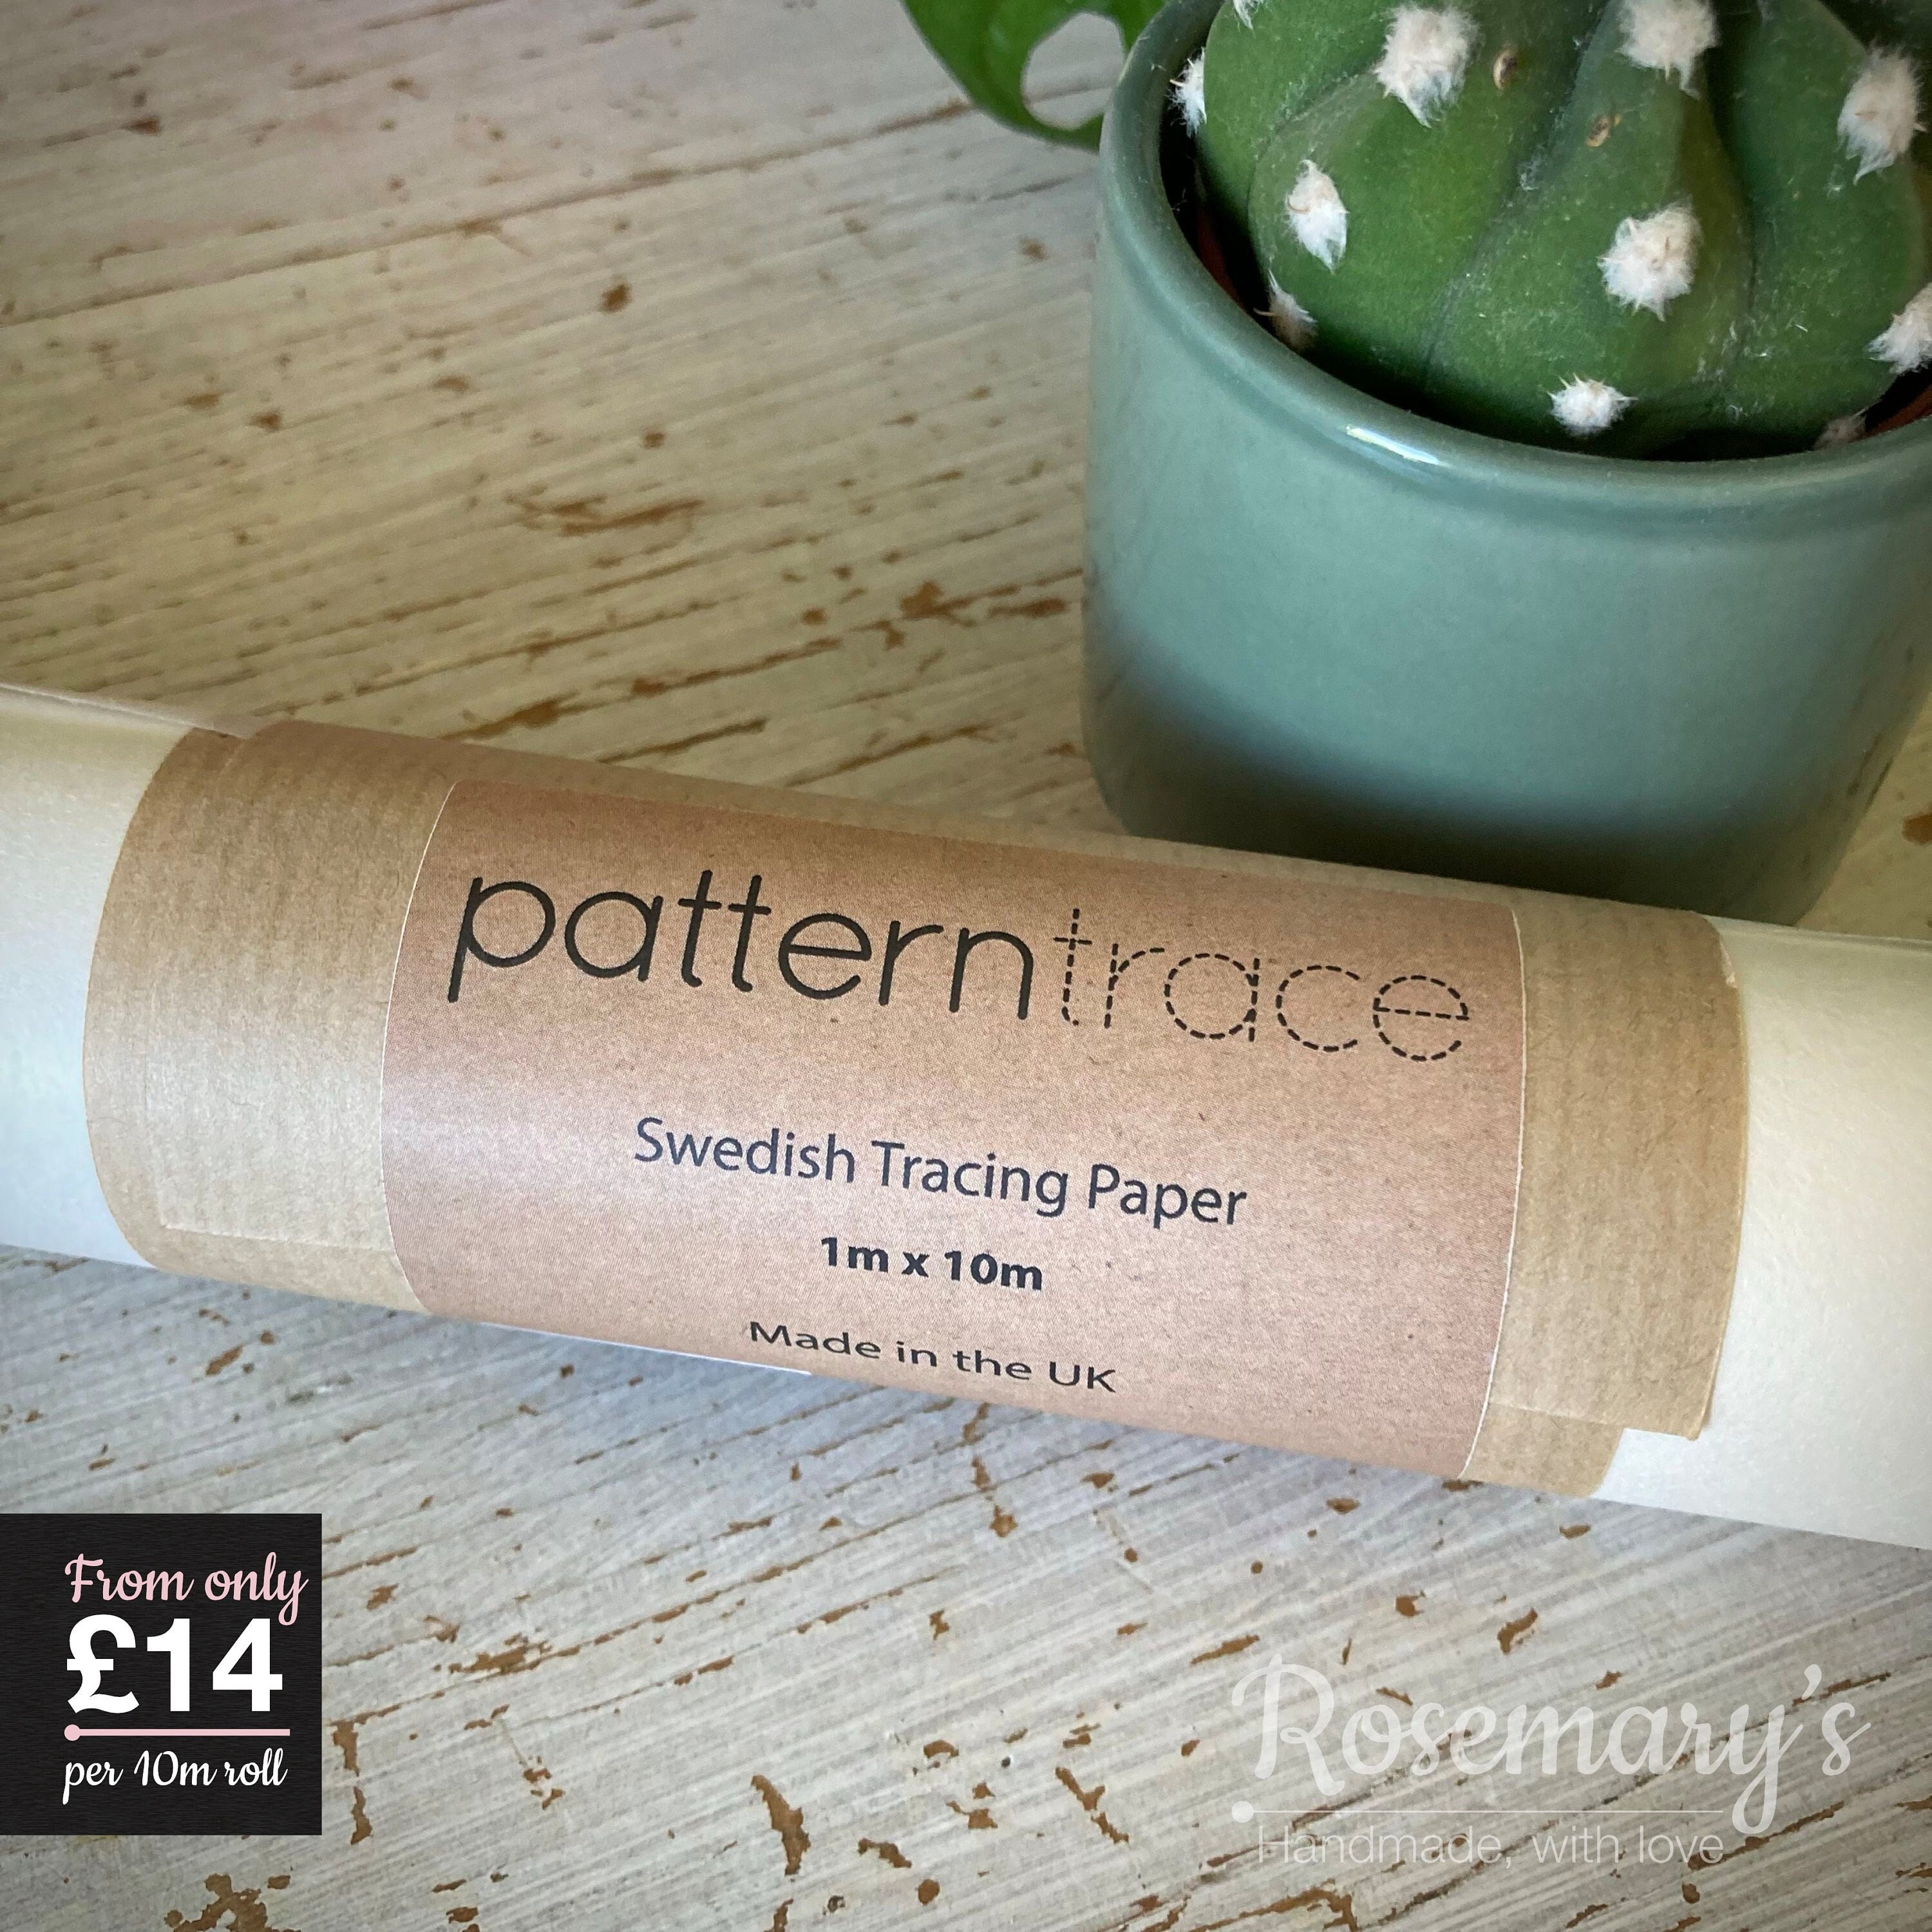 Swedish Tracing Paper - 10 yards - 29 wide Sew-able Pattern Paper - Sold  by the 10 yard roll (1907) M409.03